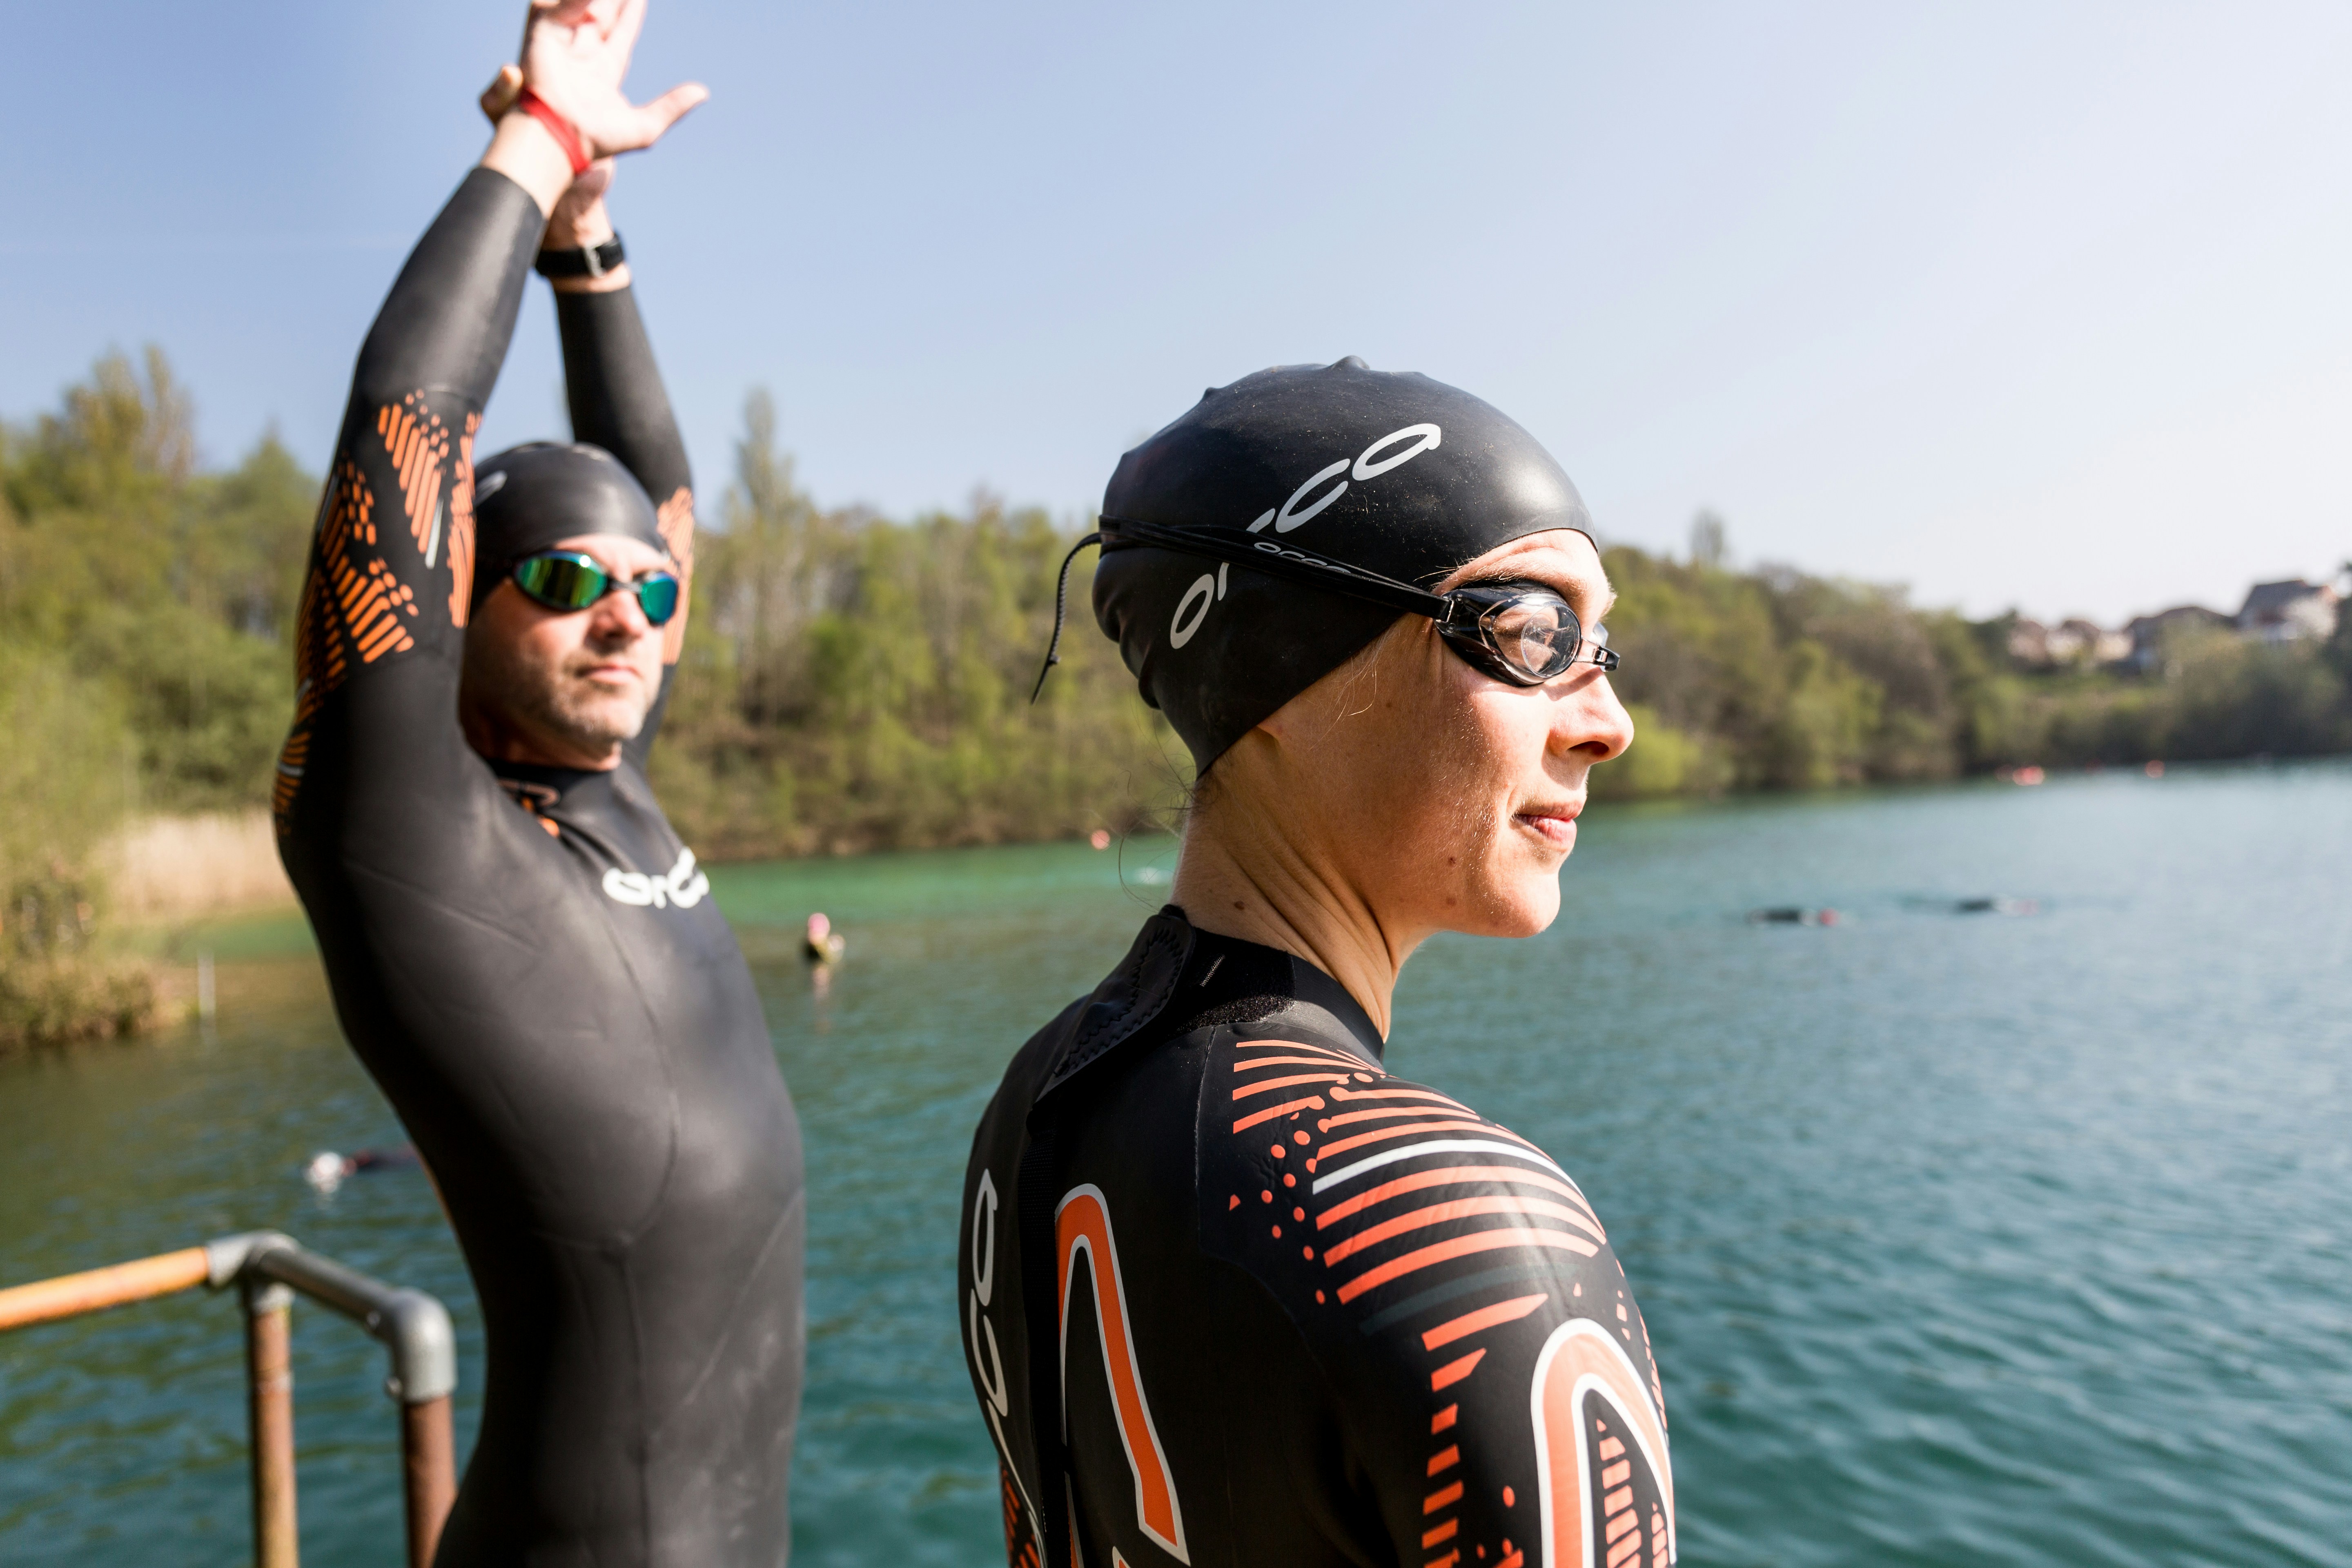 Two swimmers in wetsuits and swim caps stand by a serene lake, preparing for an open water swim. One person stretches with arms raised, while the other looks out over the water. The background features trees and a clear sky.